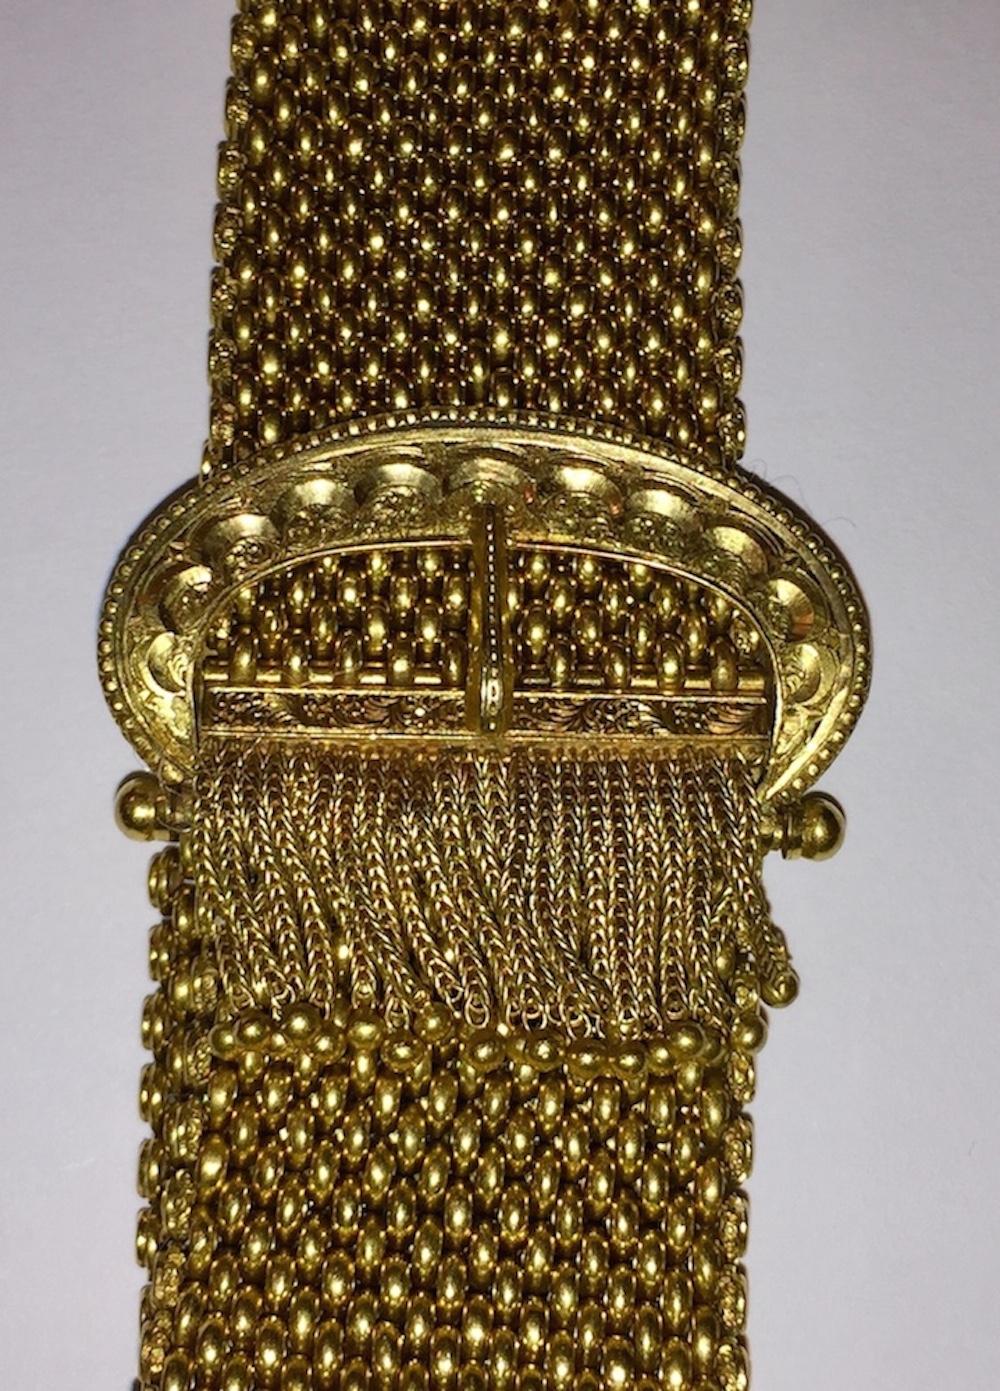 Unmarked 18 karat gold mesh buckle bracelet with fringe end. Adjustable, closes by pressing in both button on the two sides, measures 10” long and 1.75” wide. Weighs, 68.7 grams